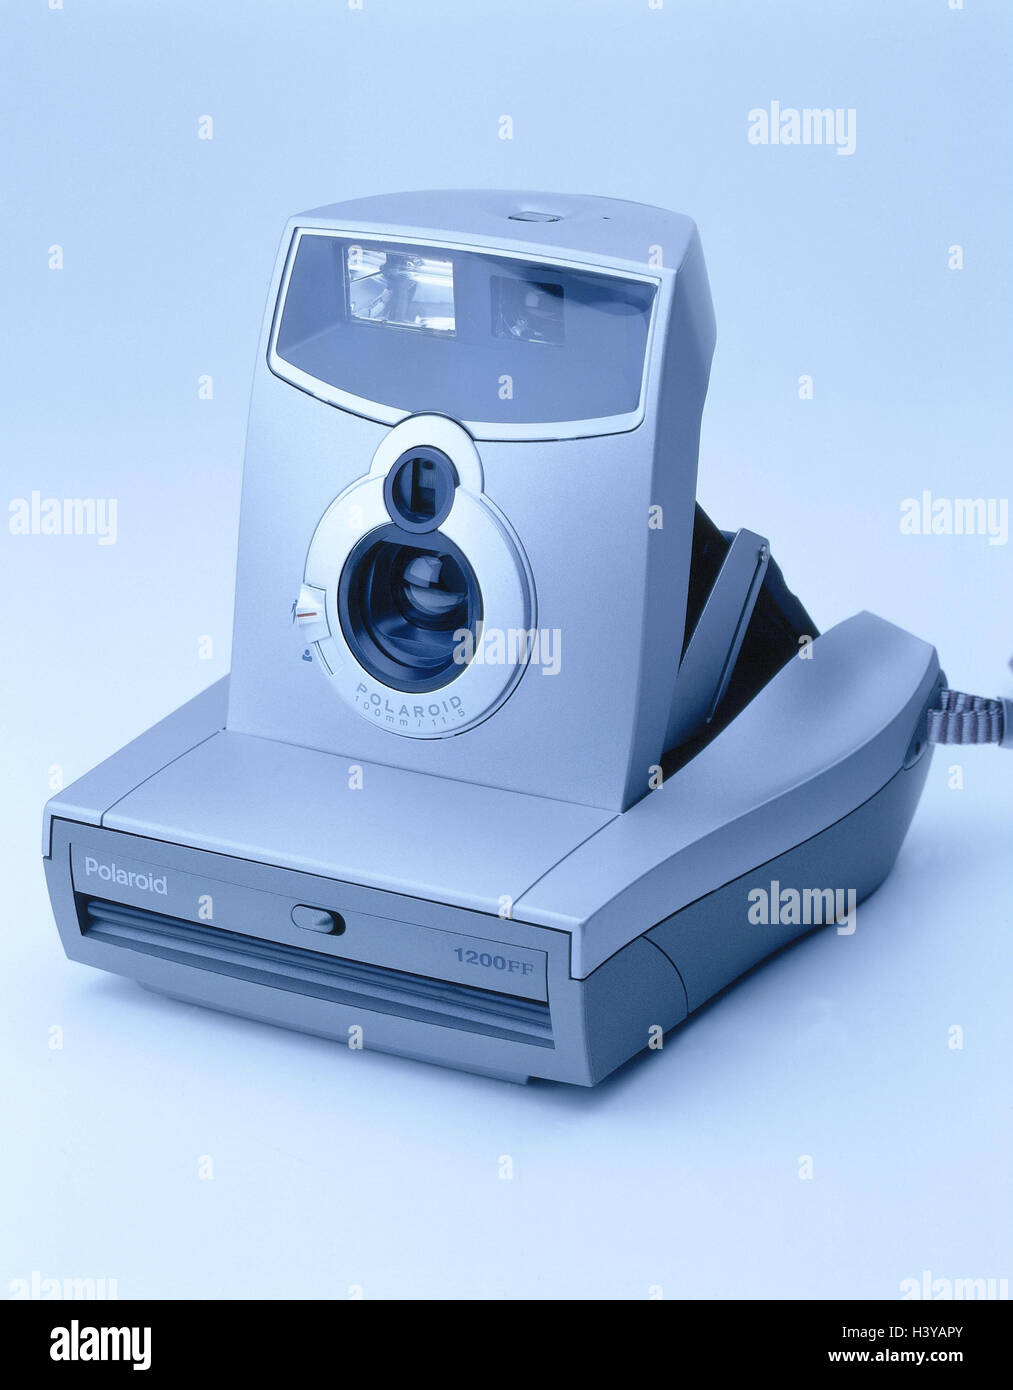 Polaroid in 1200 AND THE FOLLOWING image immediate picture camera, Still life, product photography, camera, immediate picture, Polaroid camera, photo camera, camera, photo, opened, ready for operation, rangefinder camera Stock Photo